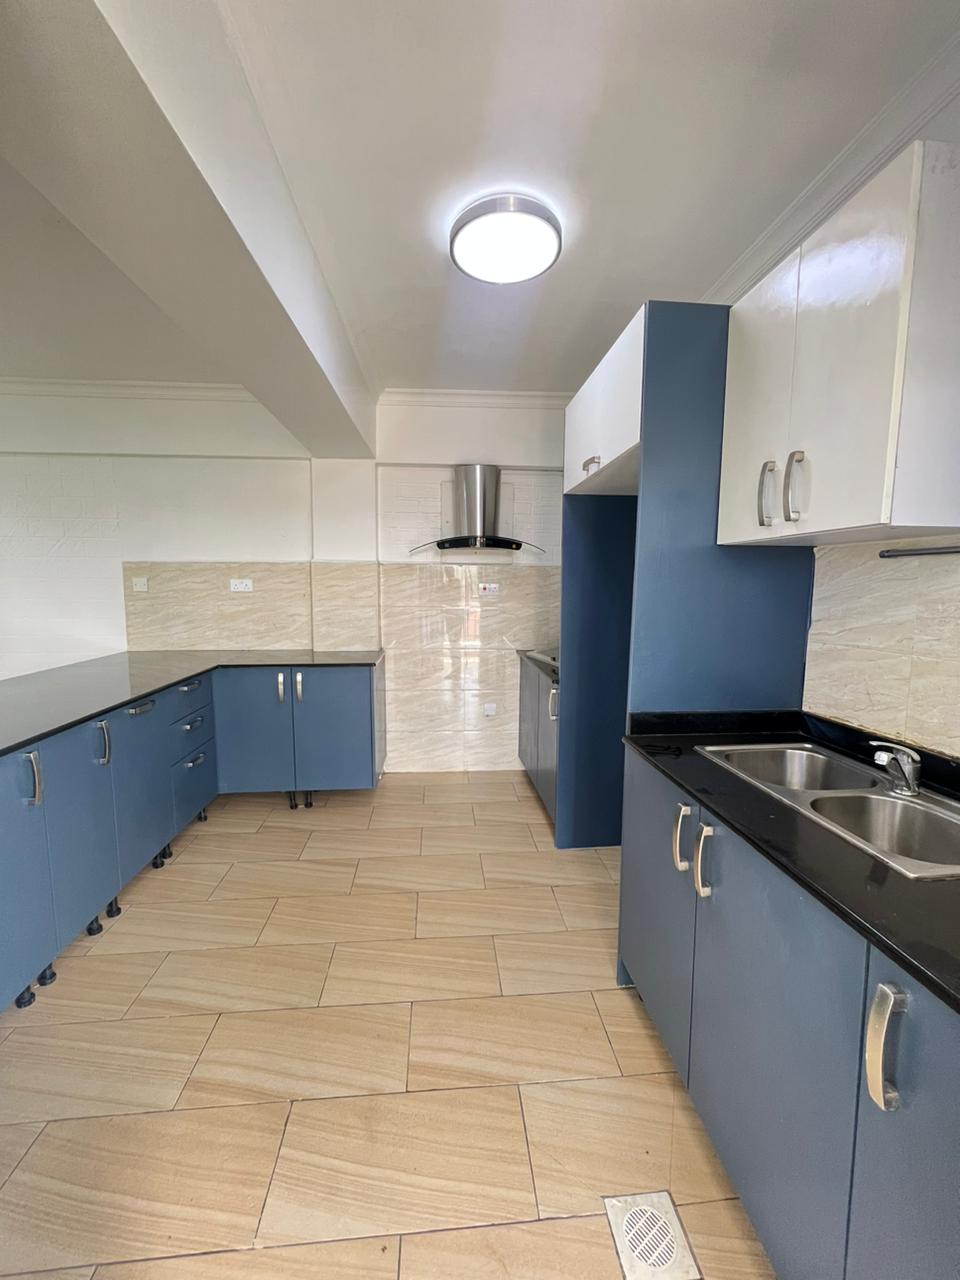 Spacious modern 3 bedroom apartment to let in Naivasha road, Nairobi. Borehole Backup generator. Rent per month 60K. Musilli Homes. Pam Golding. Hass Consult. GTC. Eighty Eighty Nairobi.